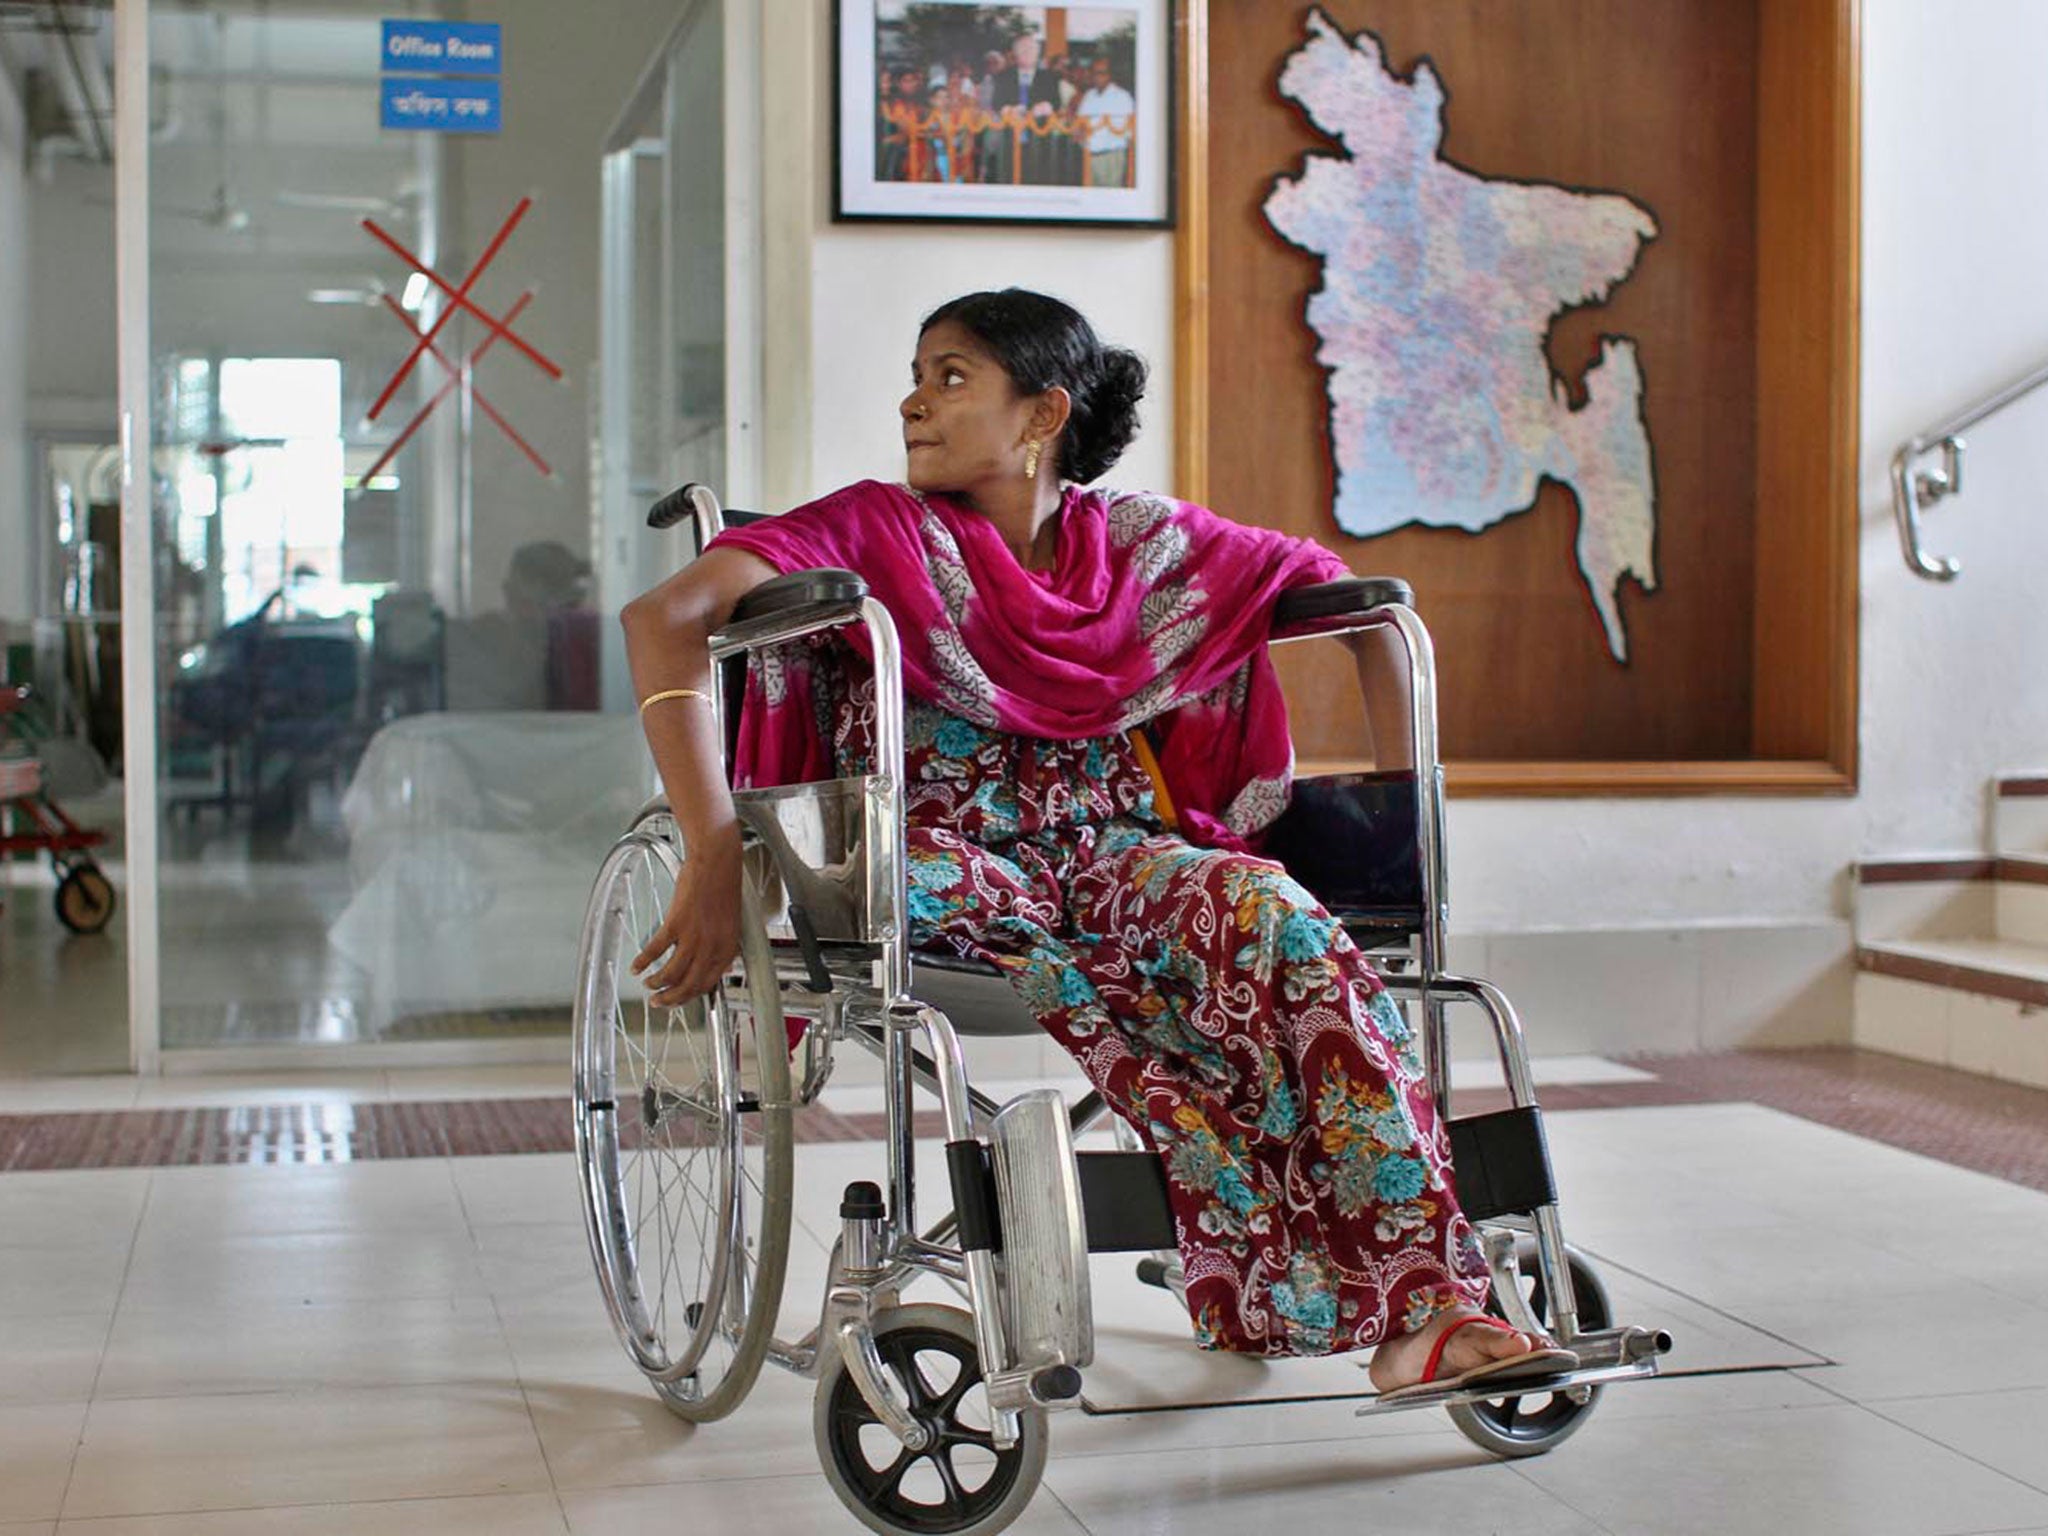 Arotee, garment worker, lost her leg at Rana Plaza collapse on 24 April 2013, now she has an artificial leg © Nashirul Islam